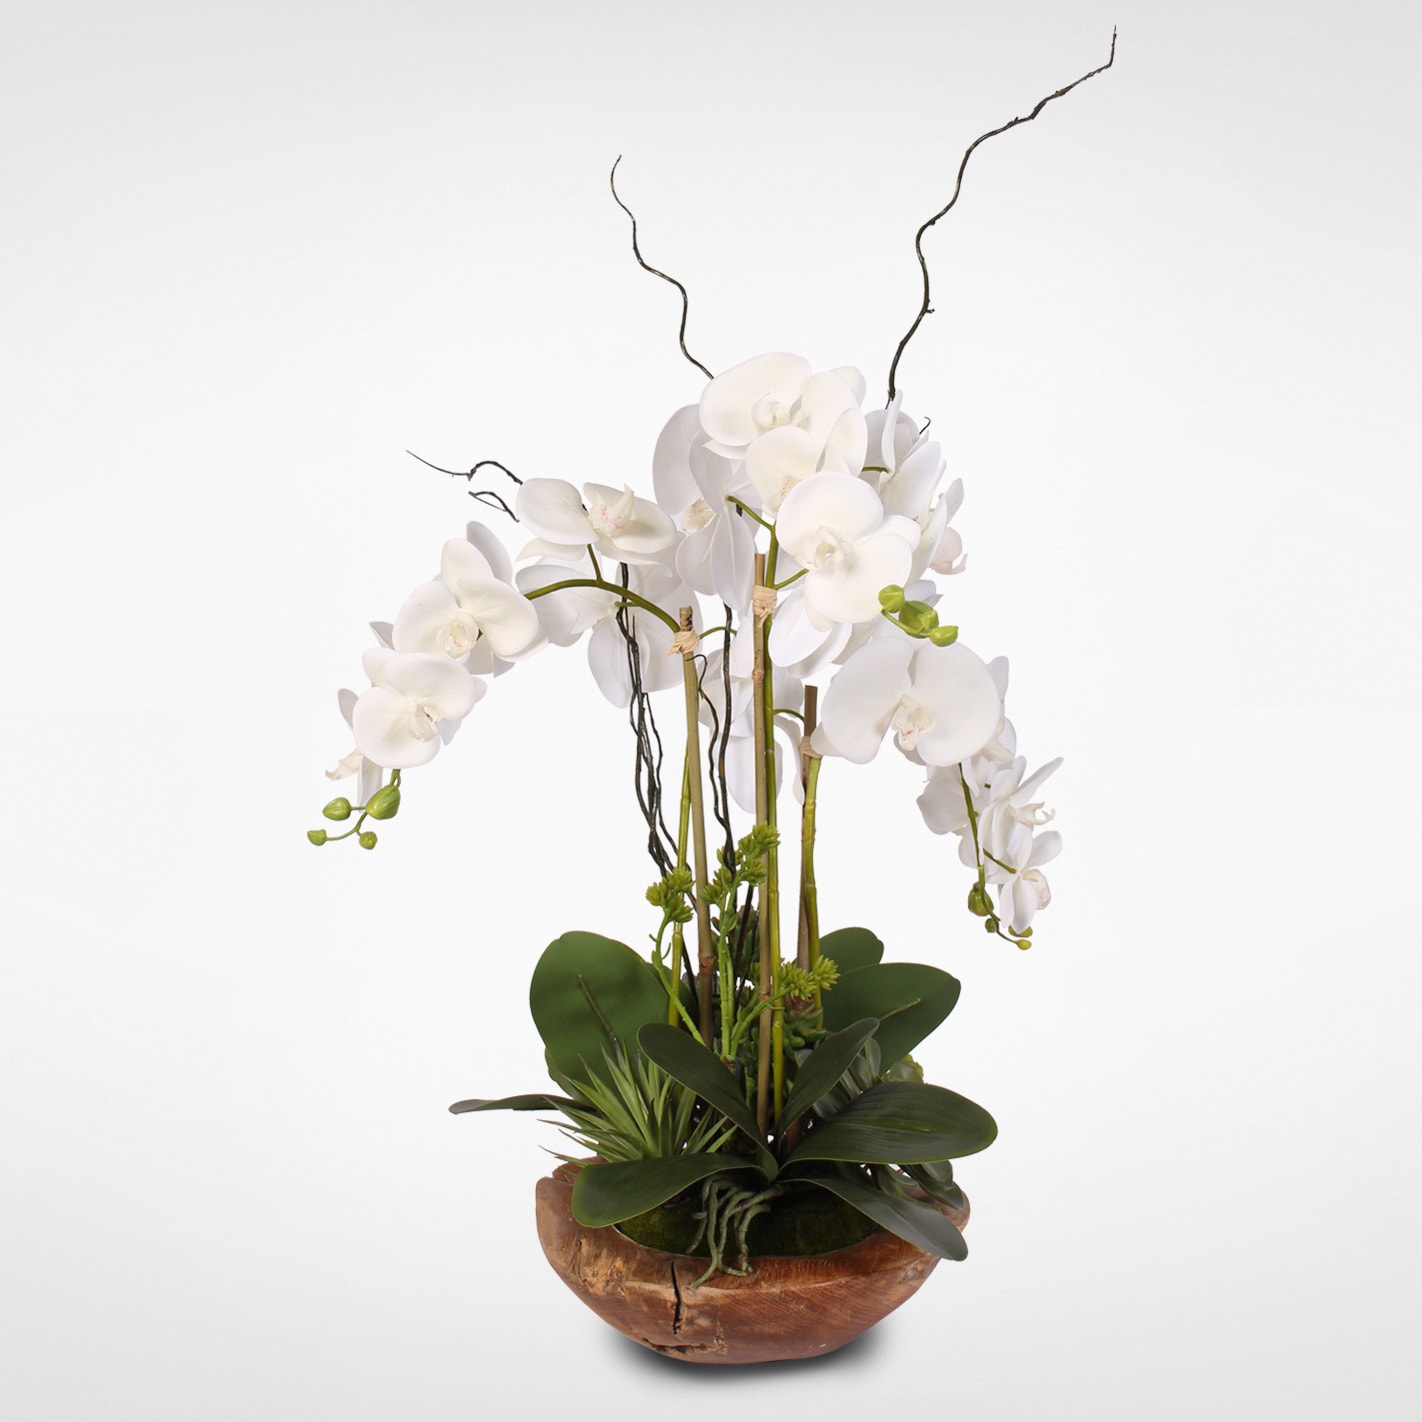 Bamboo Artificial Flowers - Bed Bath & Beyond